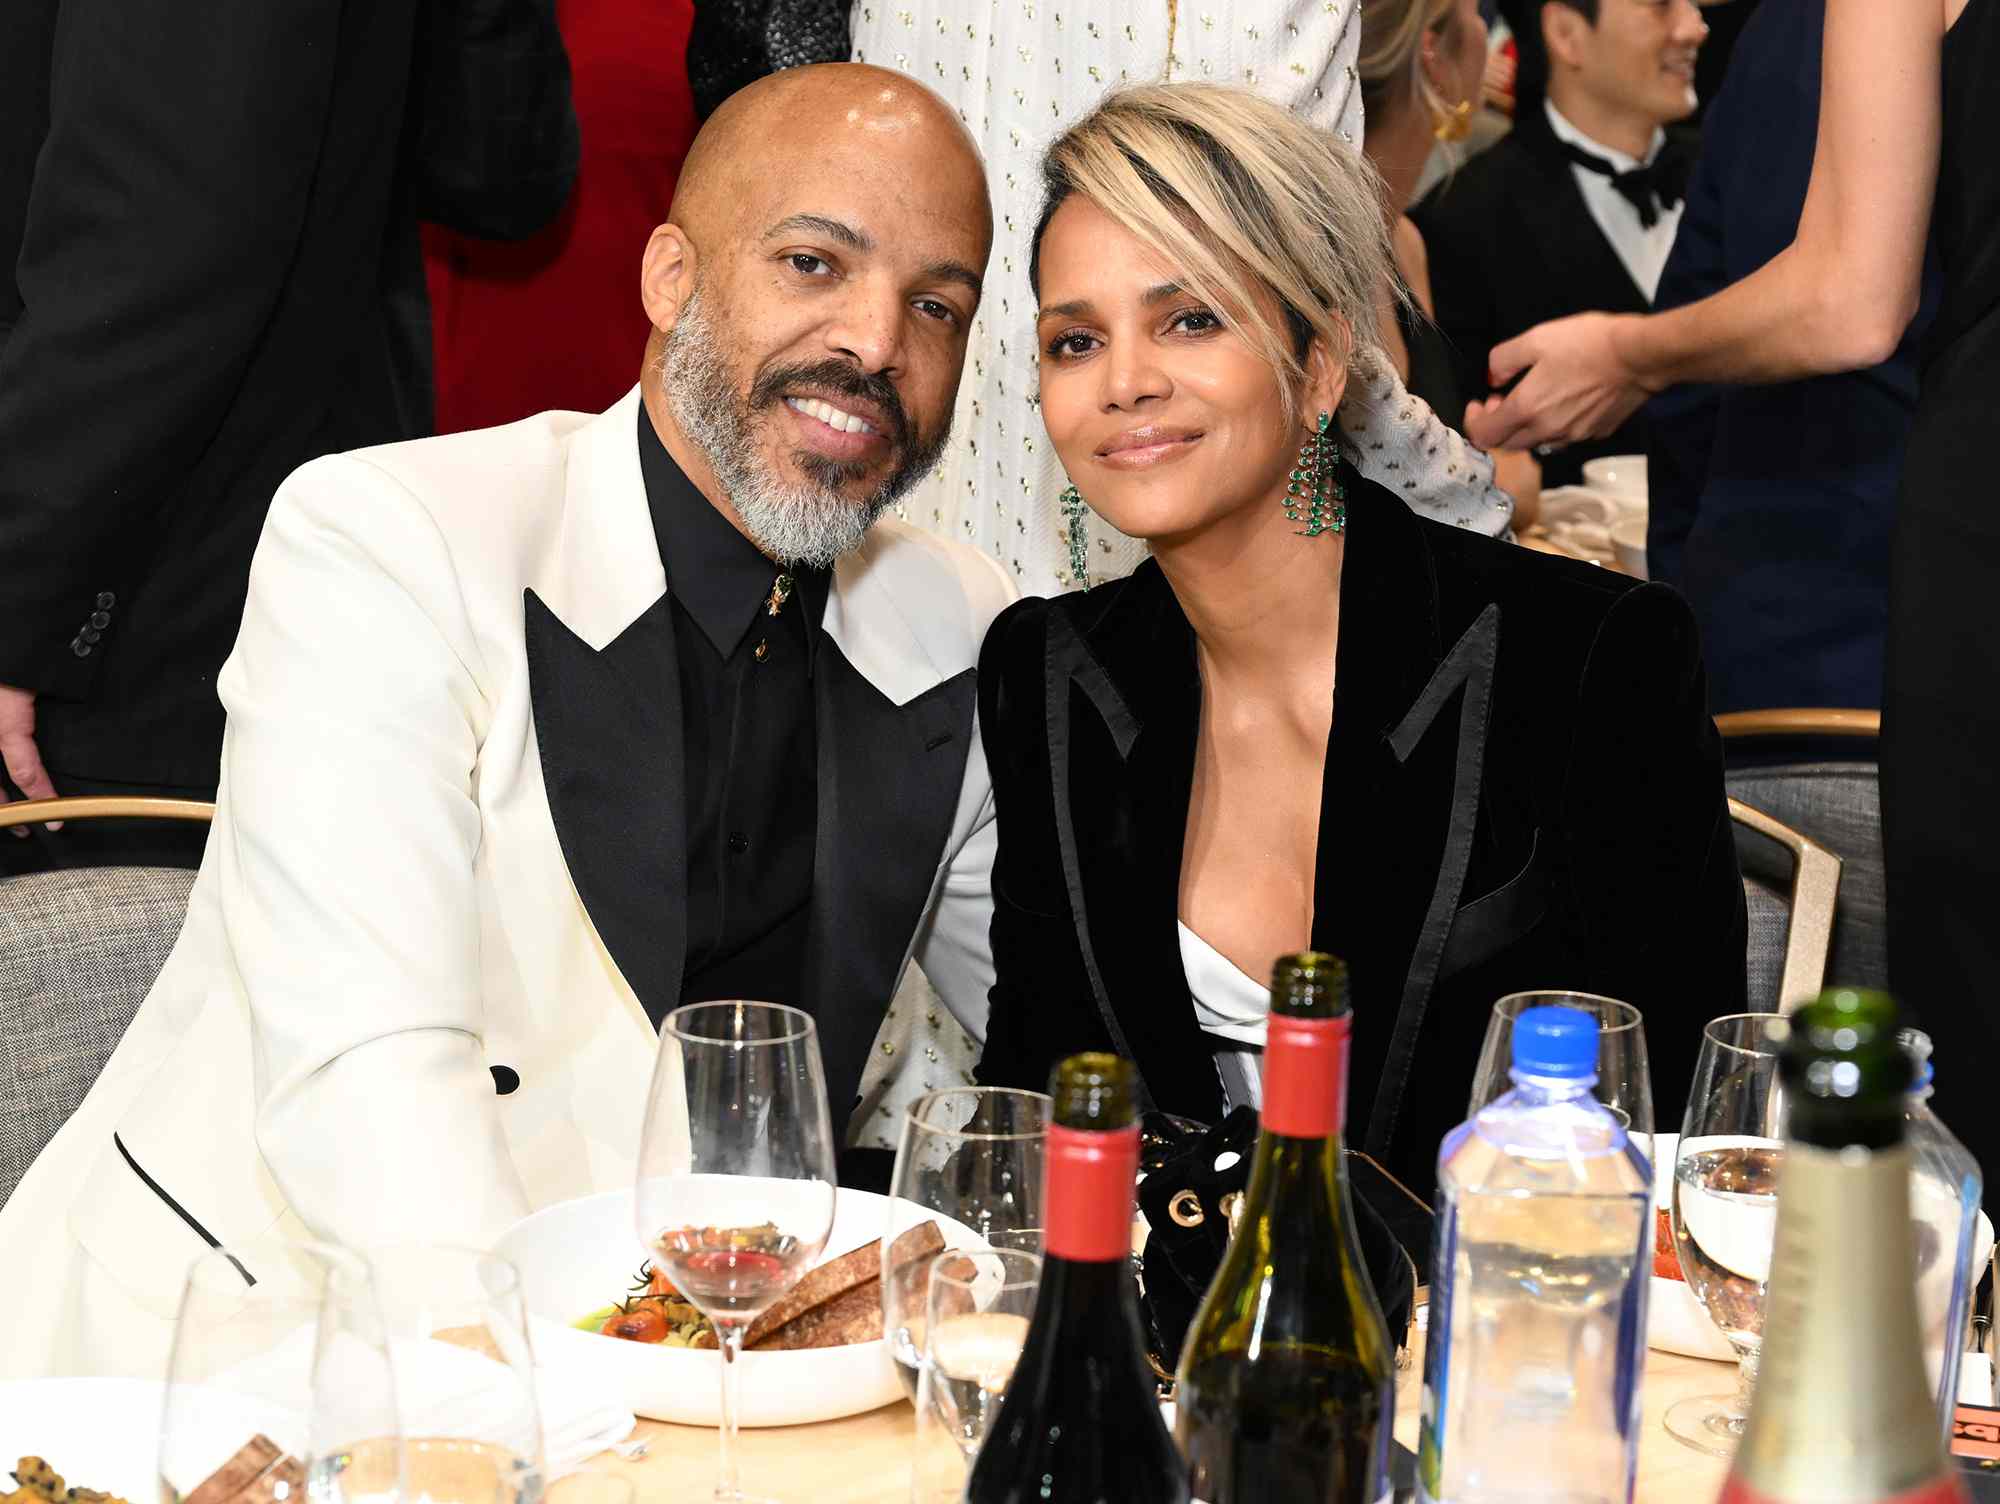 Van Hunt and Halle Berry attend the dinner with Champagne Collet & OBC Wines as they celebrate the 27th Annual Critics Choice Awards at Fairmont Century Plaza on March 13, 2022 in Los Angeles, California